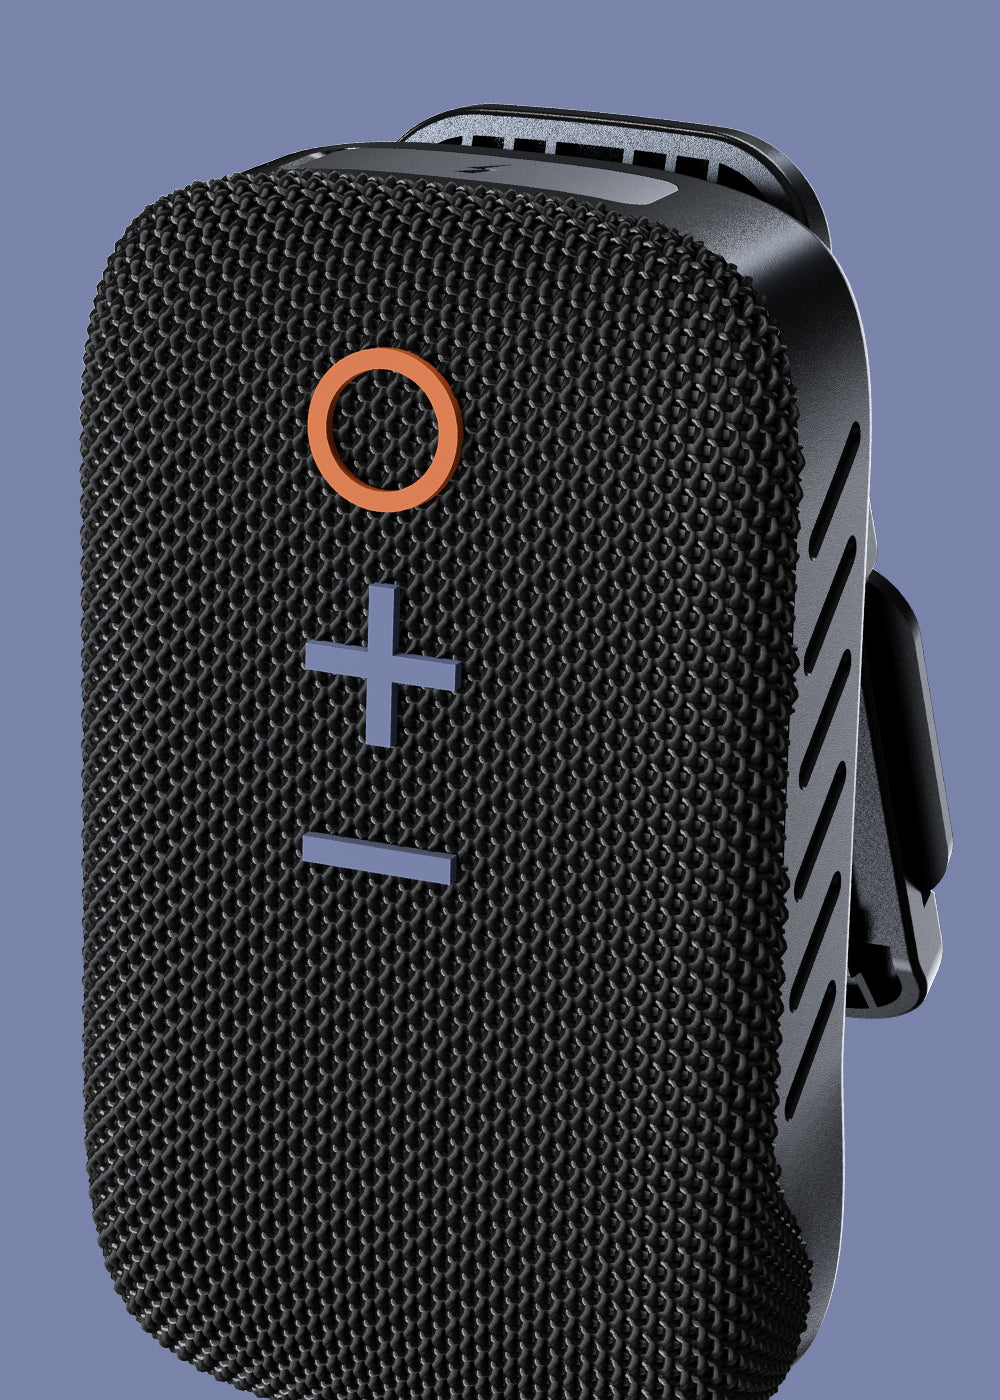 Close-up of a black portable speaker featuring a textured design with tactile volume control buttons and an orange power button on the side.